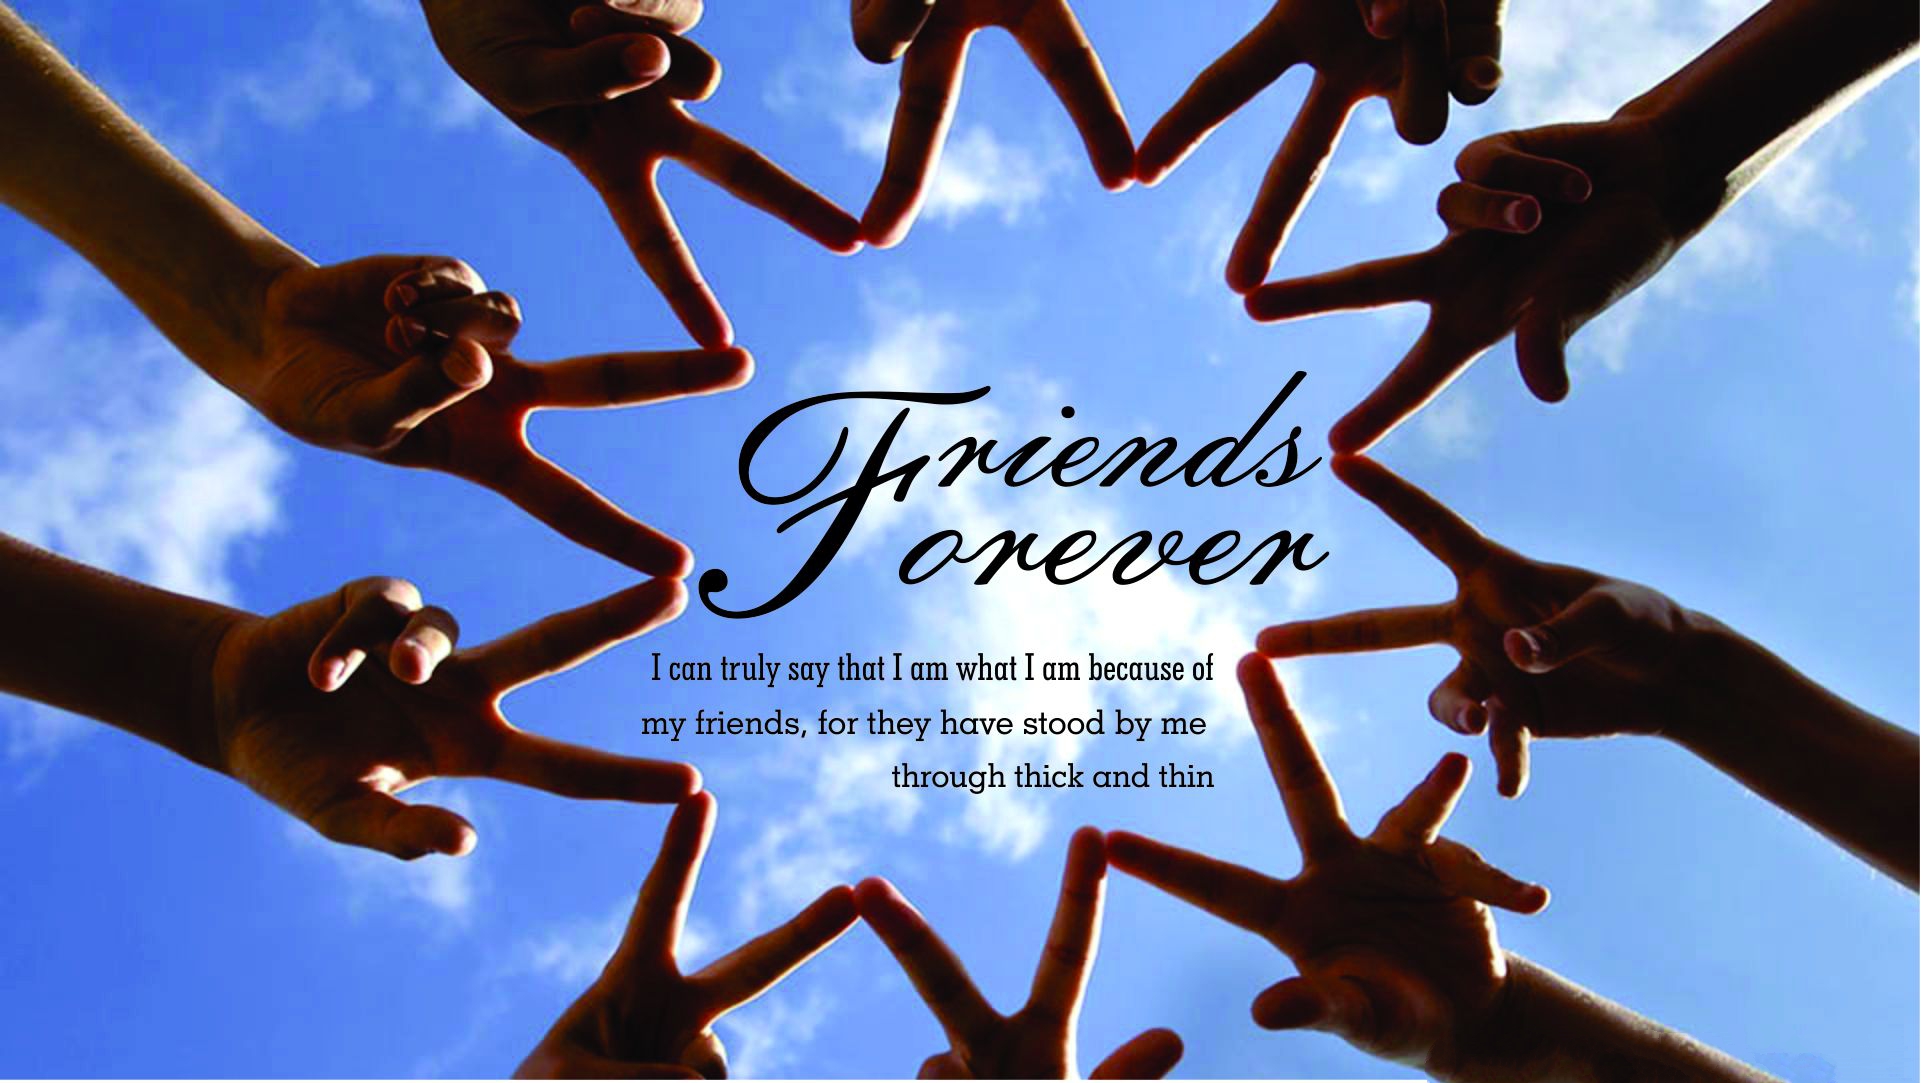 Best Friends Forever Backgrounds Hd - Friends Forever Hd Images Download , HD Wallpaper & Backgrounds